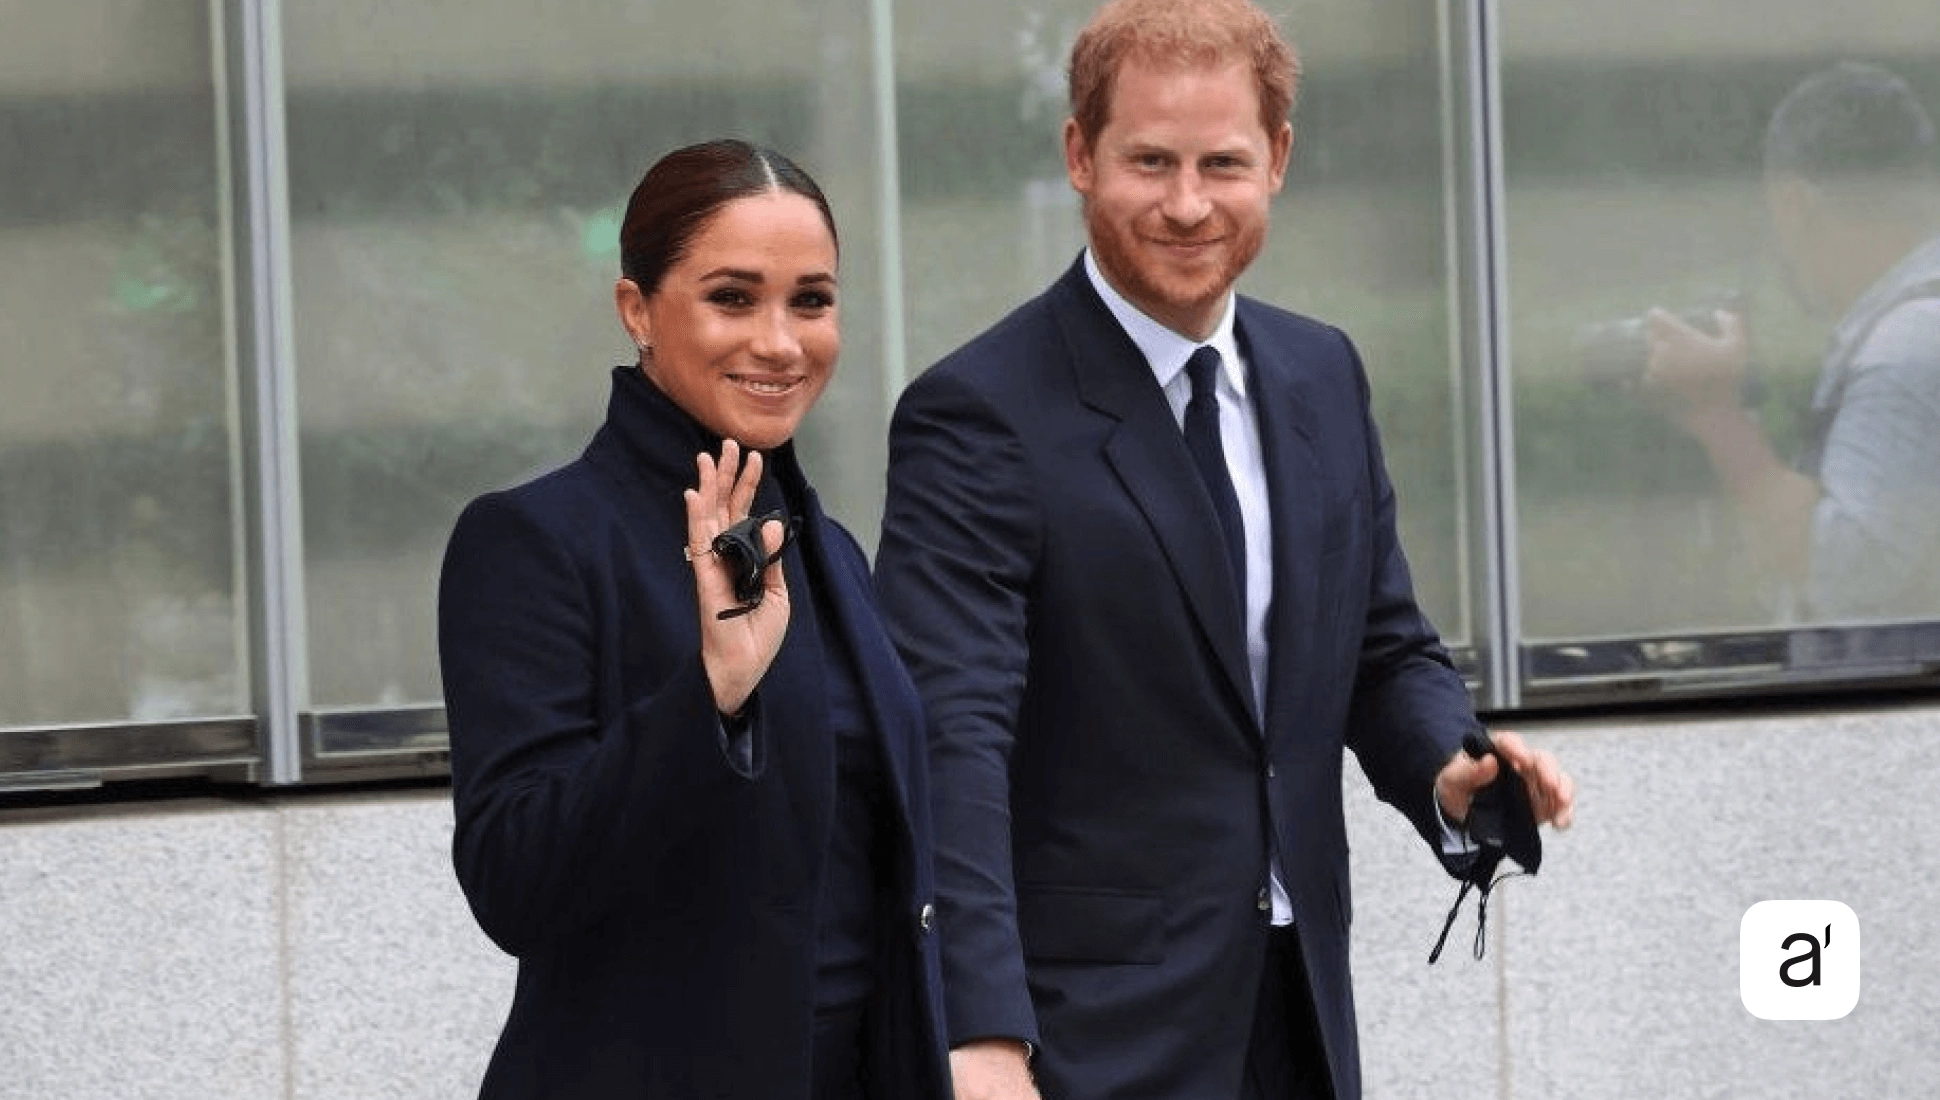 Harry and Meghan Join Ethical Fintech. What’s it All About?